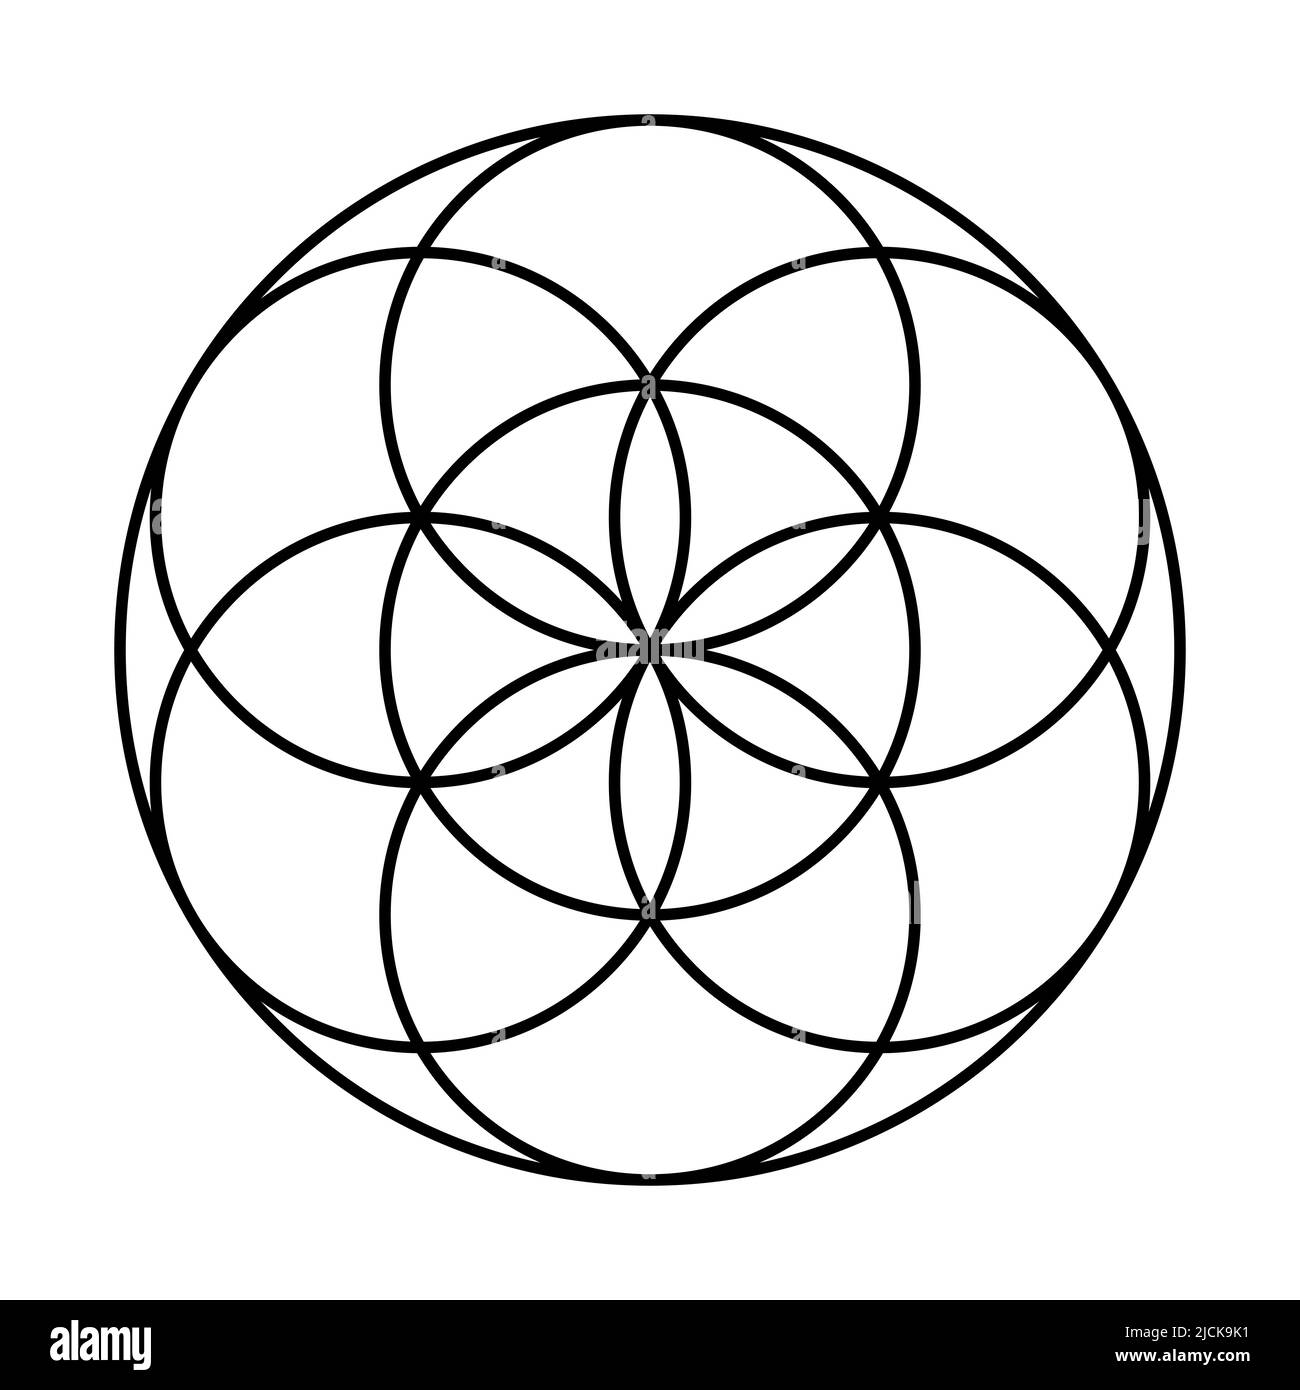 Flower of life symbol ancient Black and White Stock Photos & Images - Alamy